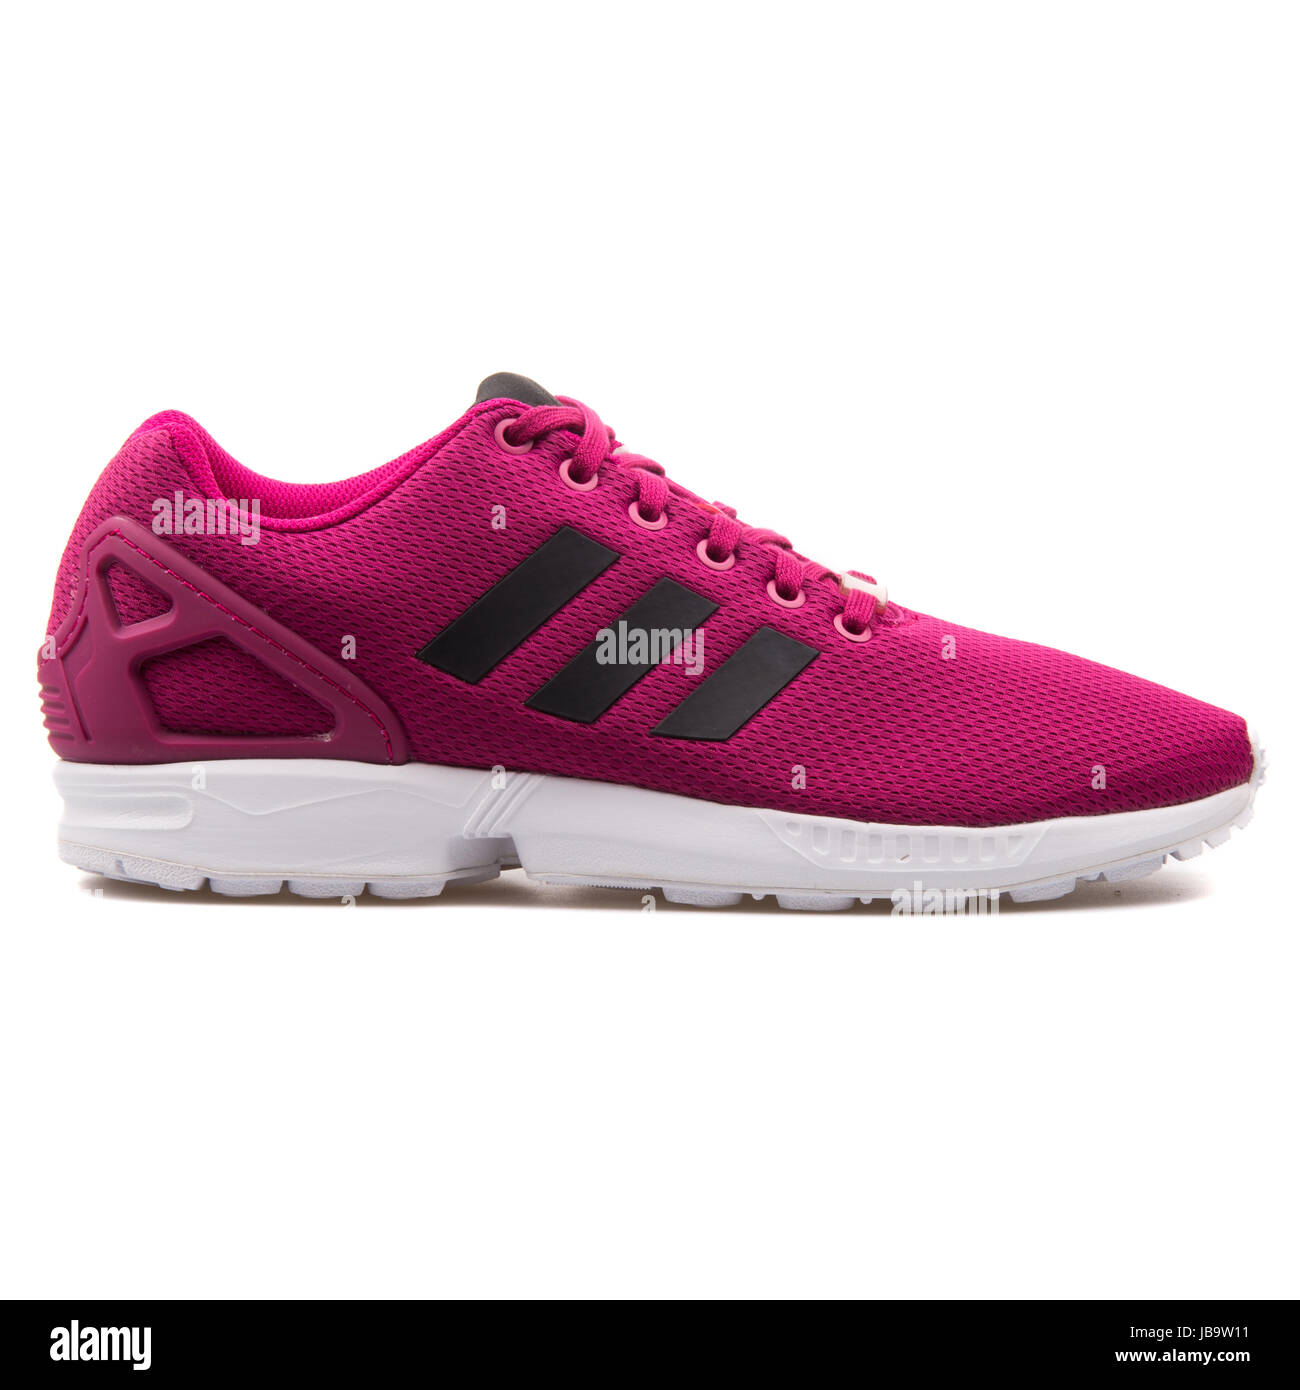 adidas flux pink and white Off 74% - www.loverethymno.com